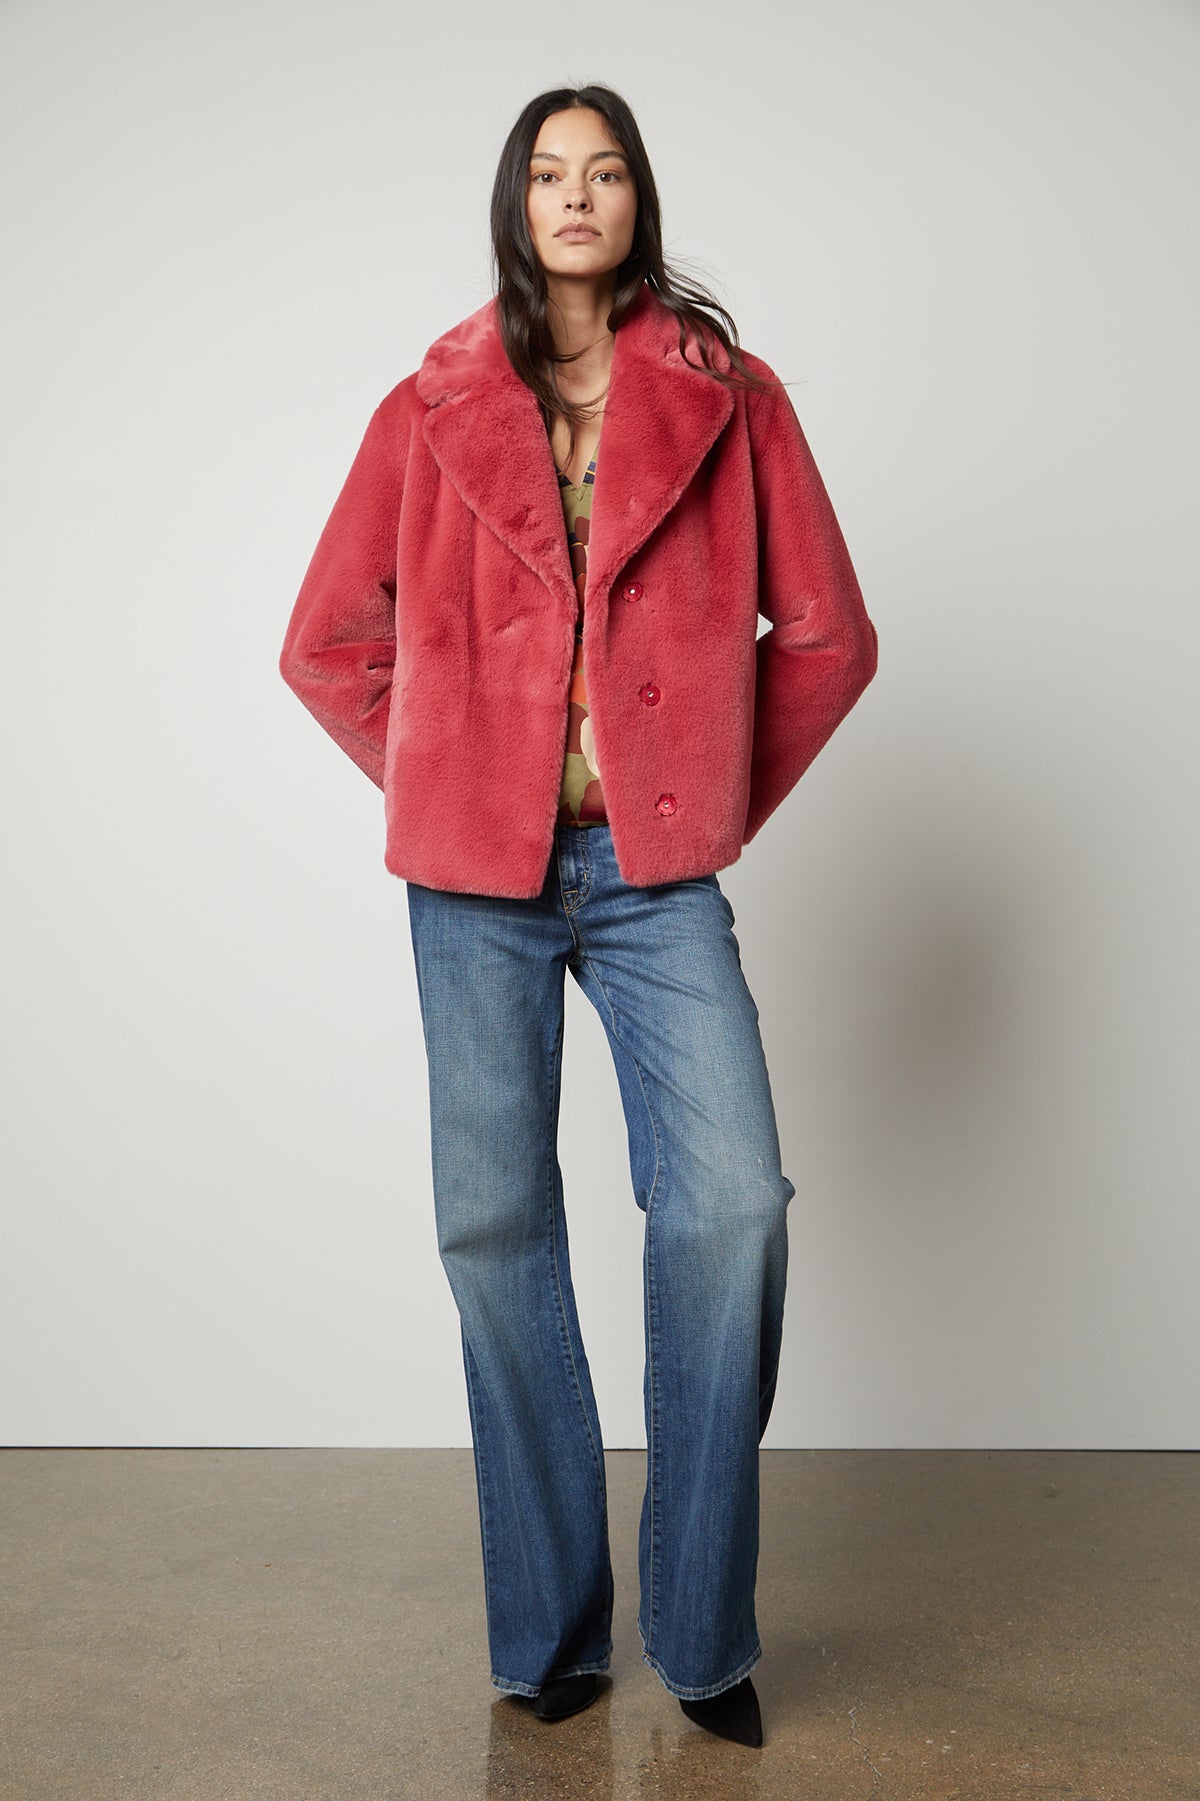   The model is looking chic in a pink Velvet by Graham & Spencer RAQUEL FAUX LUX FUR JACKET, perfect for the cold weather. 